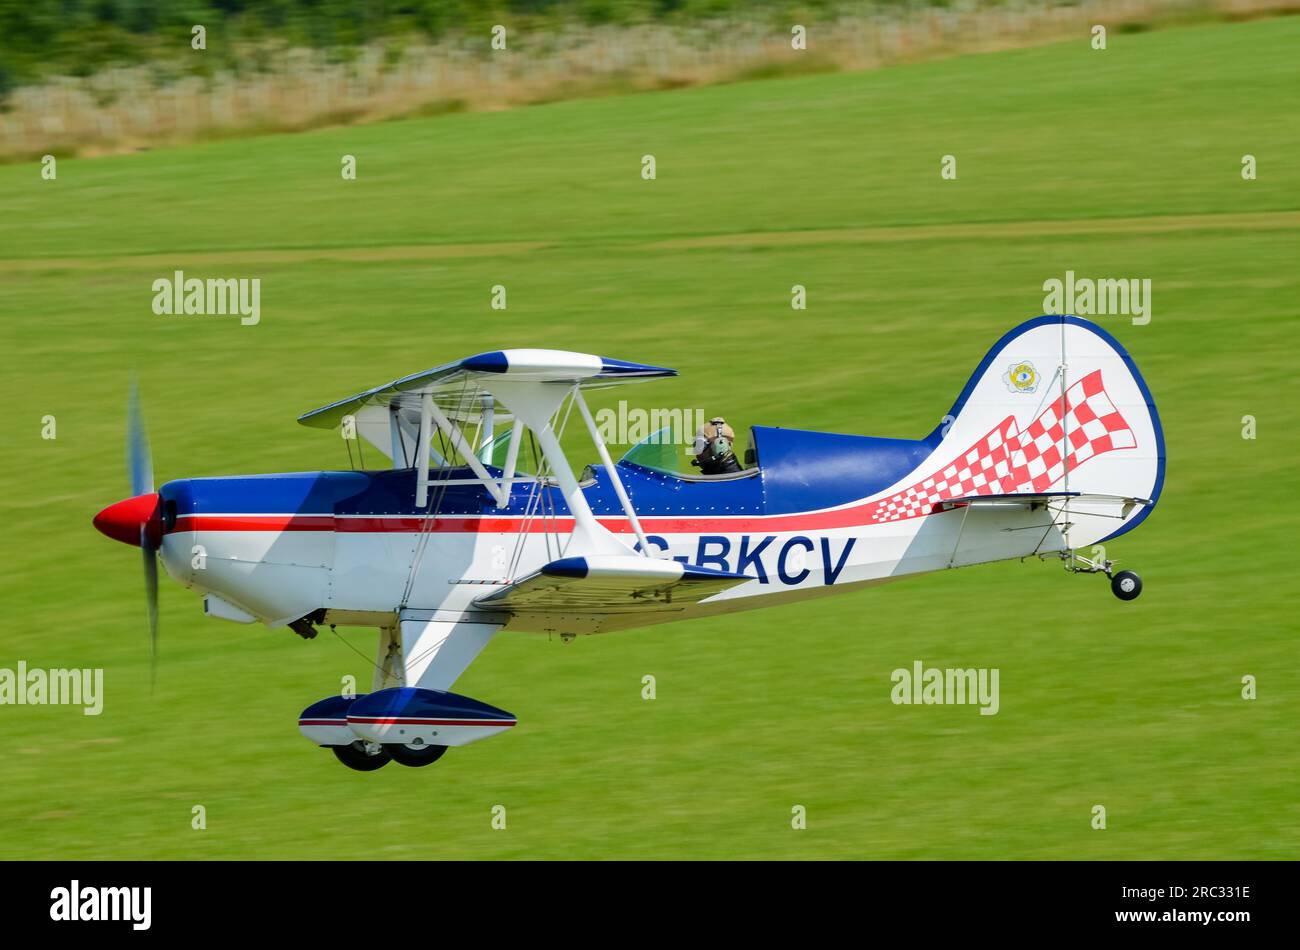 EAA Acro Sport II plane G-BKCV taking off from grass airstrip at a fly-in  event in the countryside at Heveningham Hall. Rural country in Suffolk  Stock Photo - Alamy